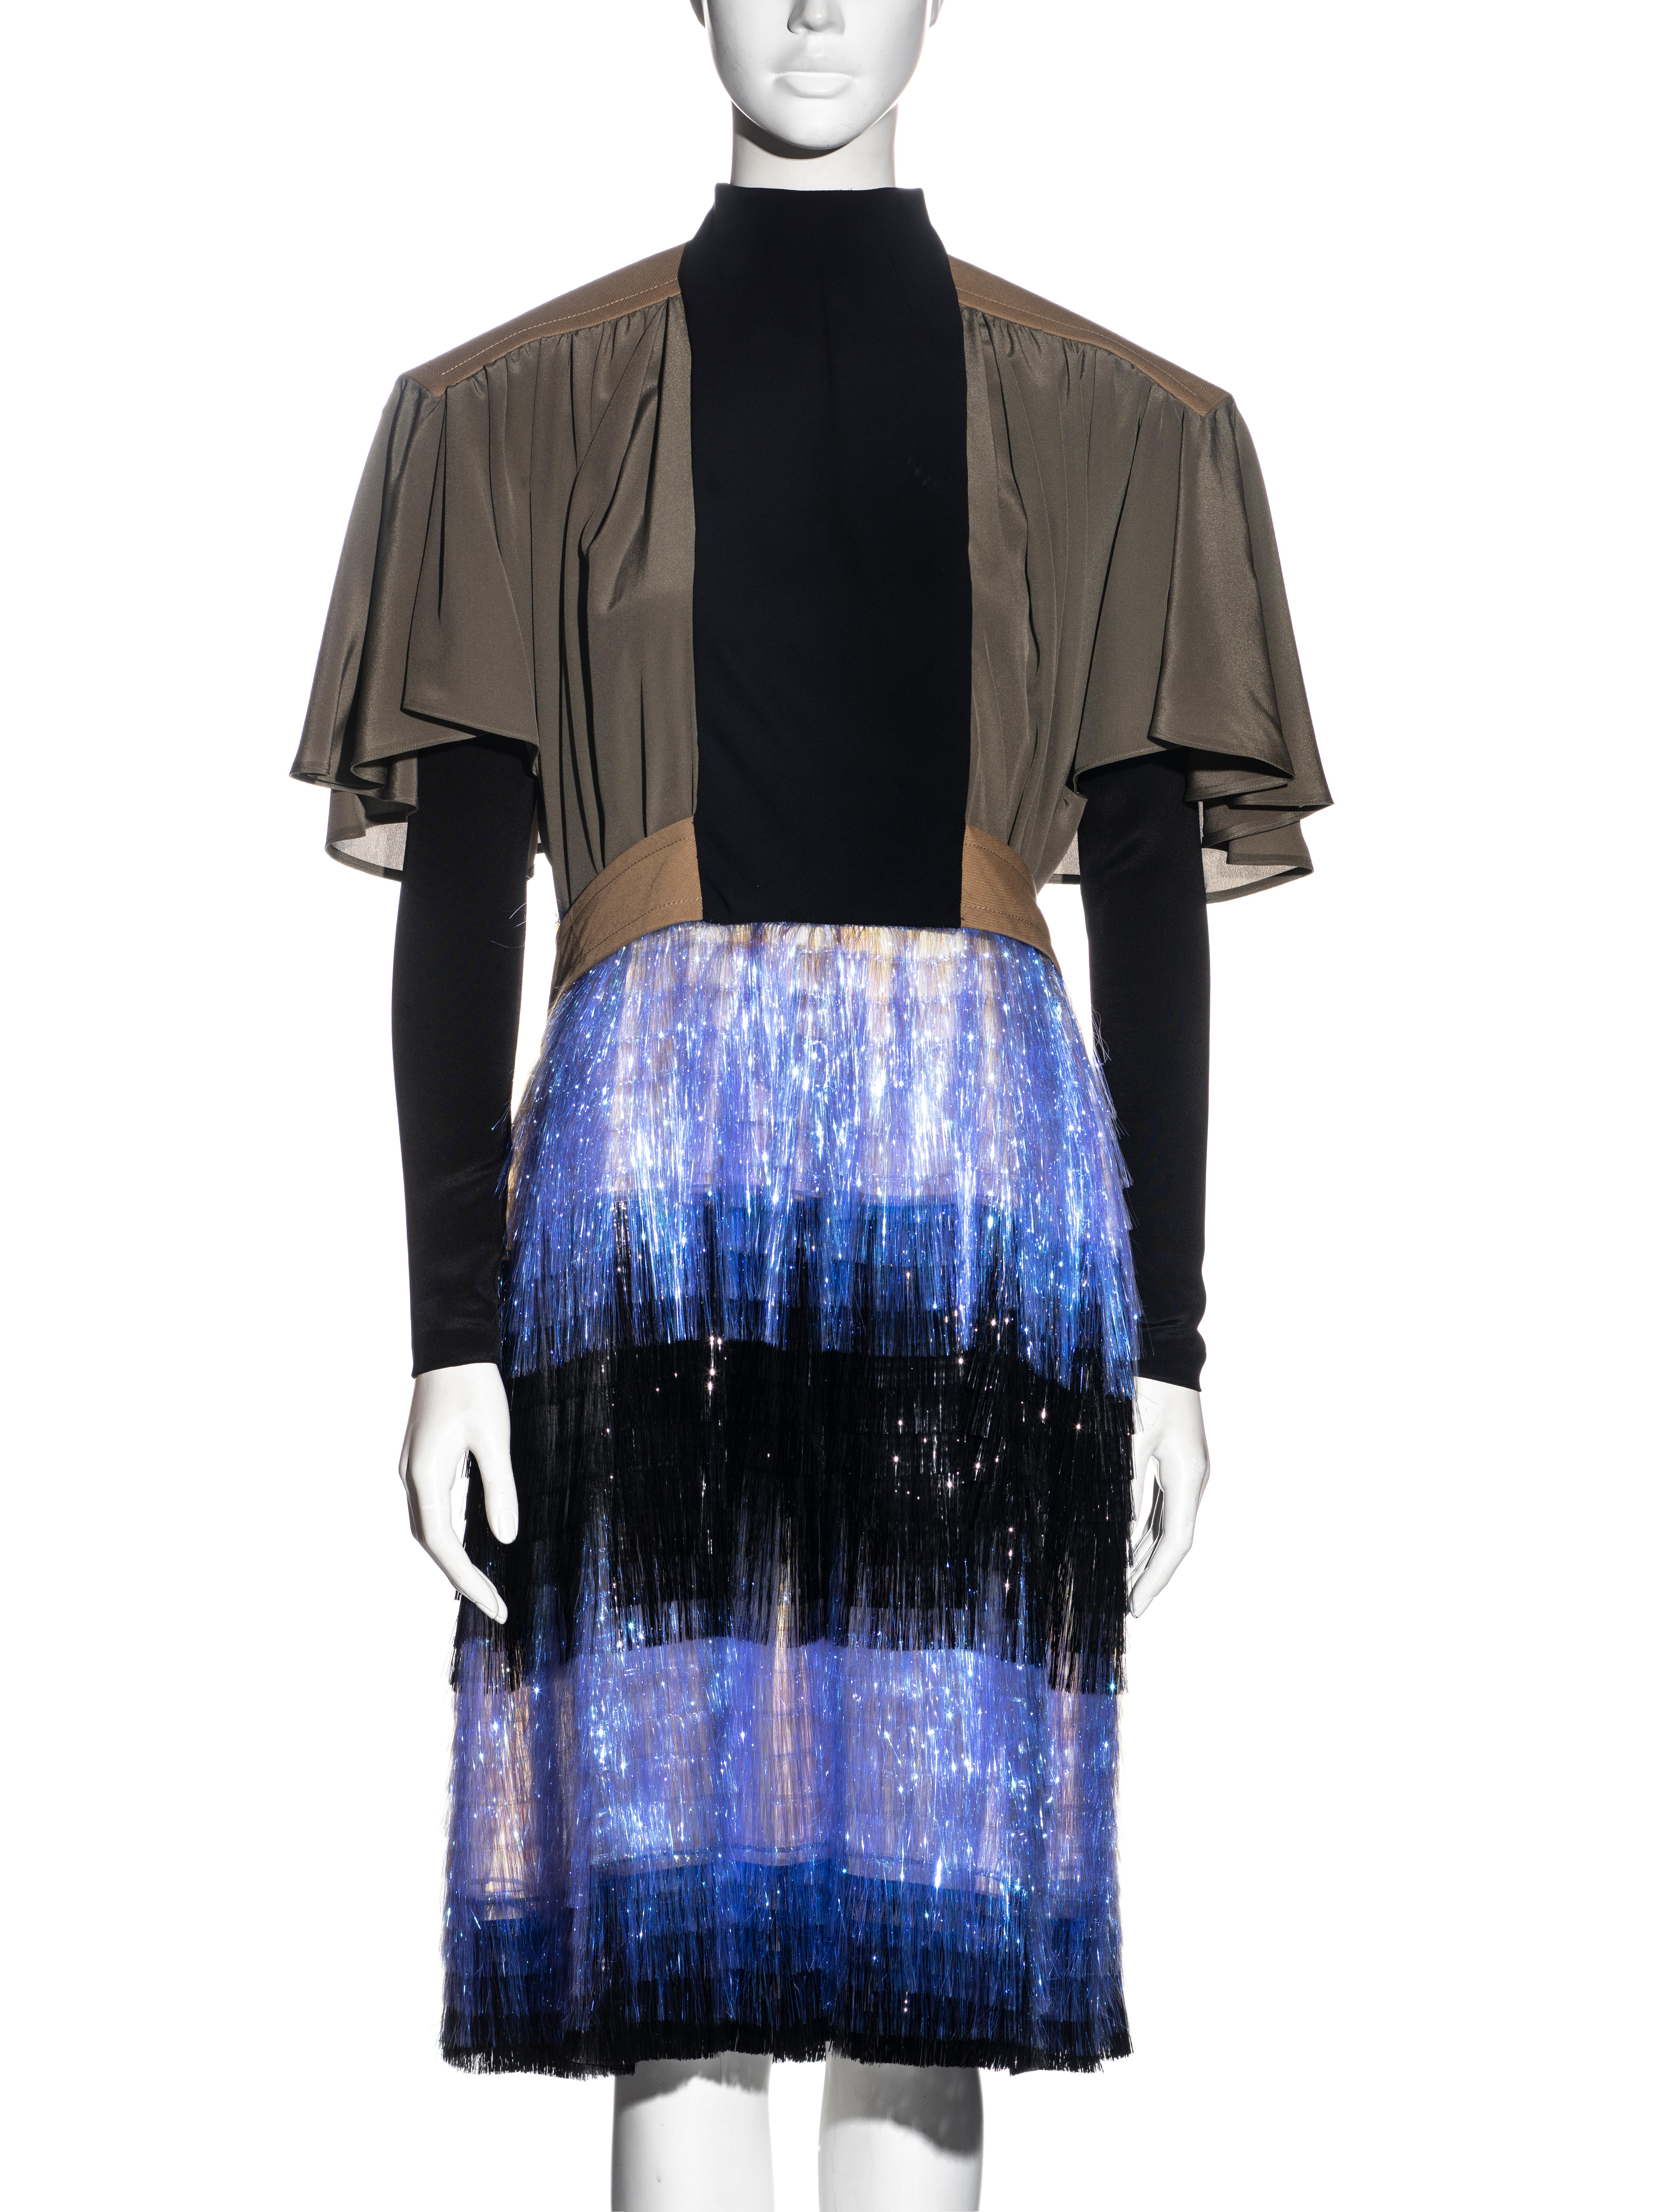 ▪ Rare Balenciaga mixed media dress
▪ Designed by Nicholas Ghesquière
▪ Extended shoulders
▪ Wide short sleeves with long fitted black sleeves underneath 
▪ Cotton belt hangs loosely a the back 
▪ Purple and black lurex fringe skirt 
▪ FR 36 - UK 8